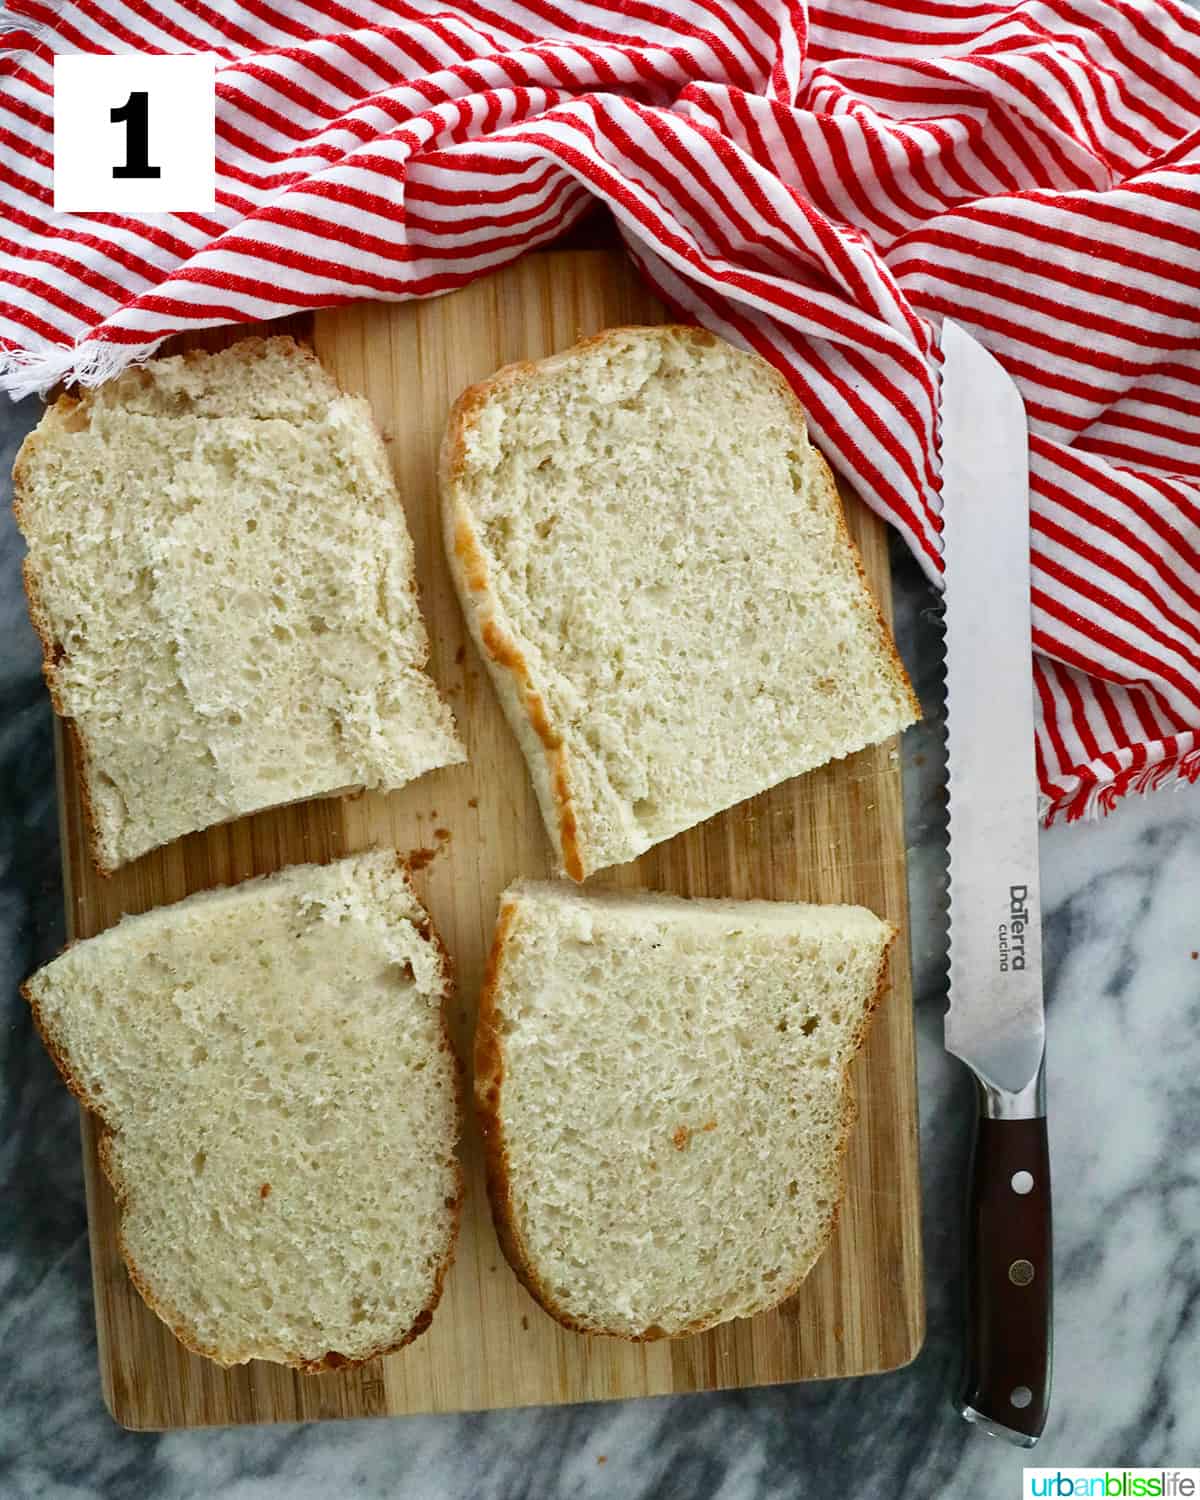 four sliced halves of french bread on a cutting board and red striped napkin with bread knife.